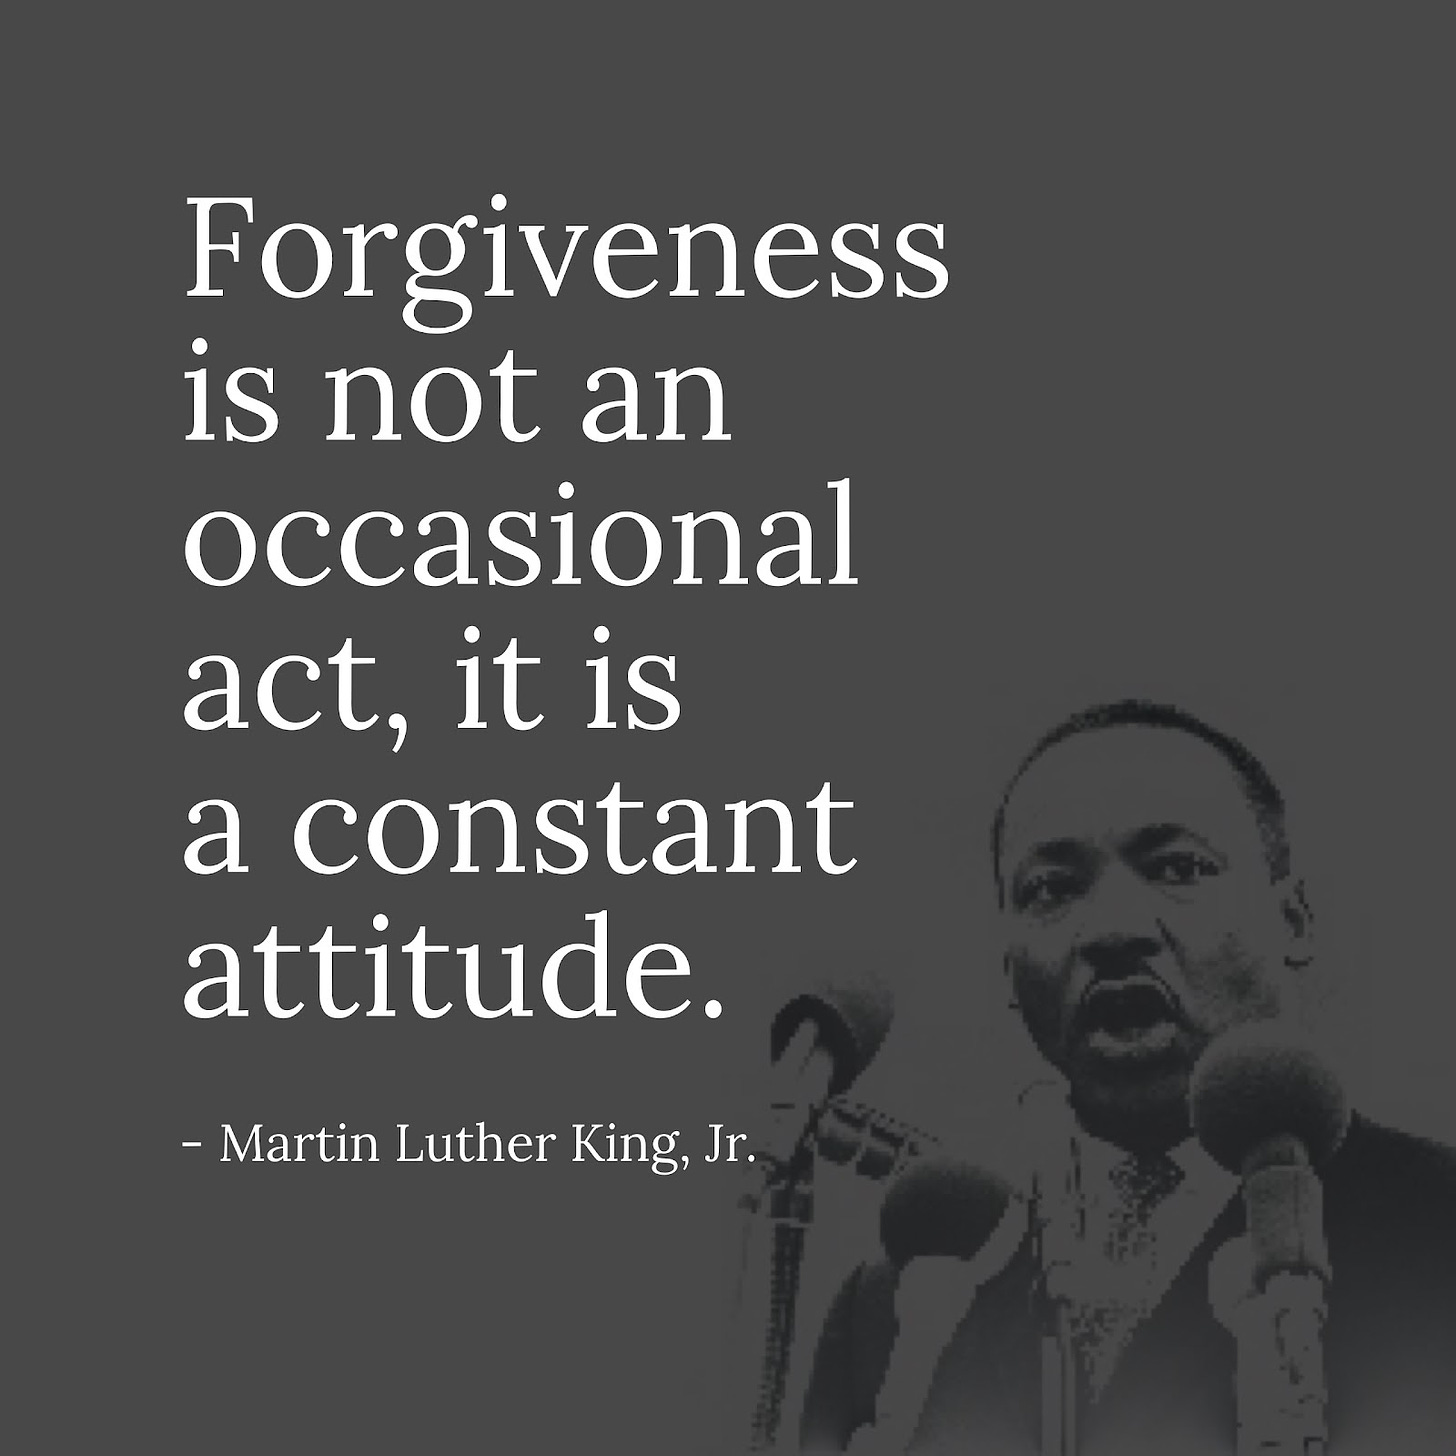 Forgiveness: A Lesson From Martin Luther King Jr.